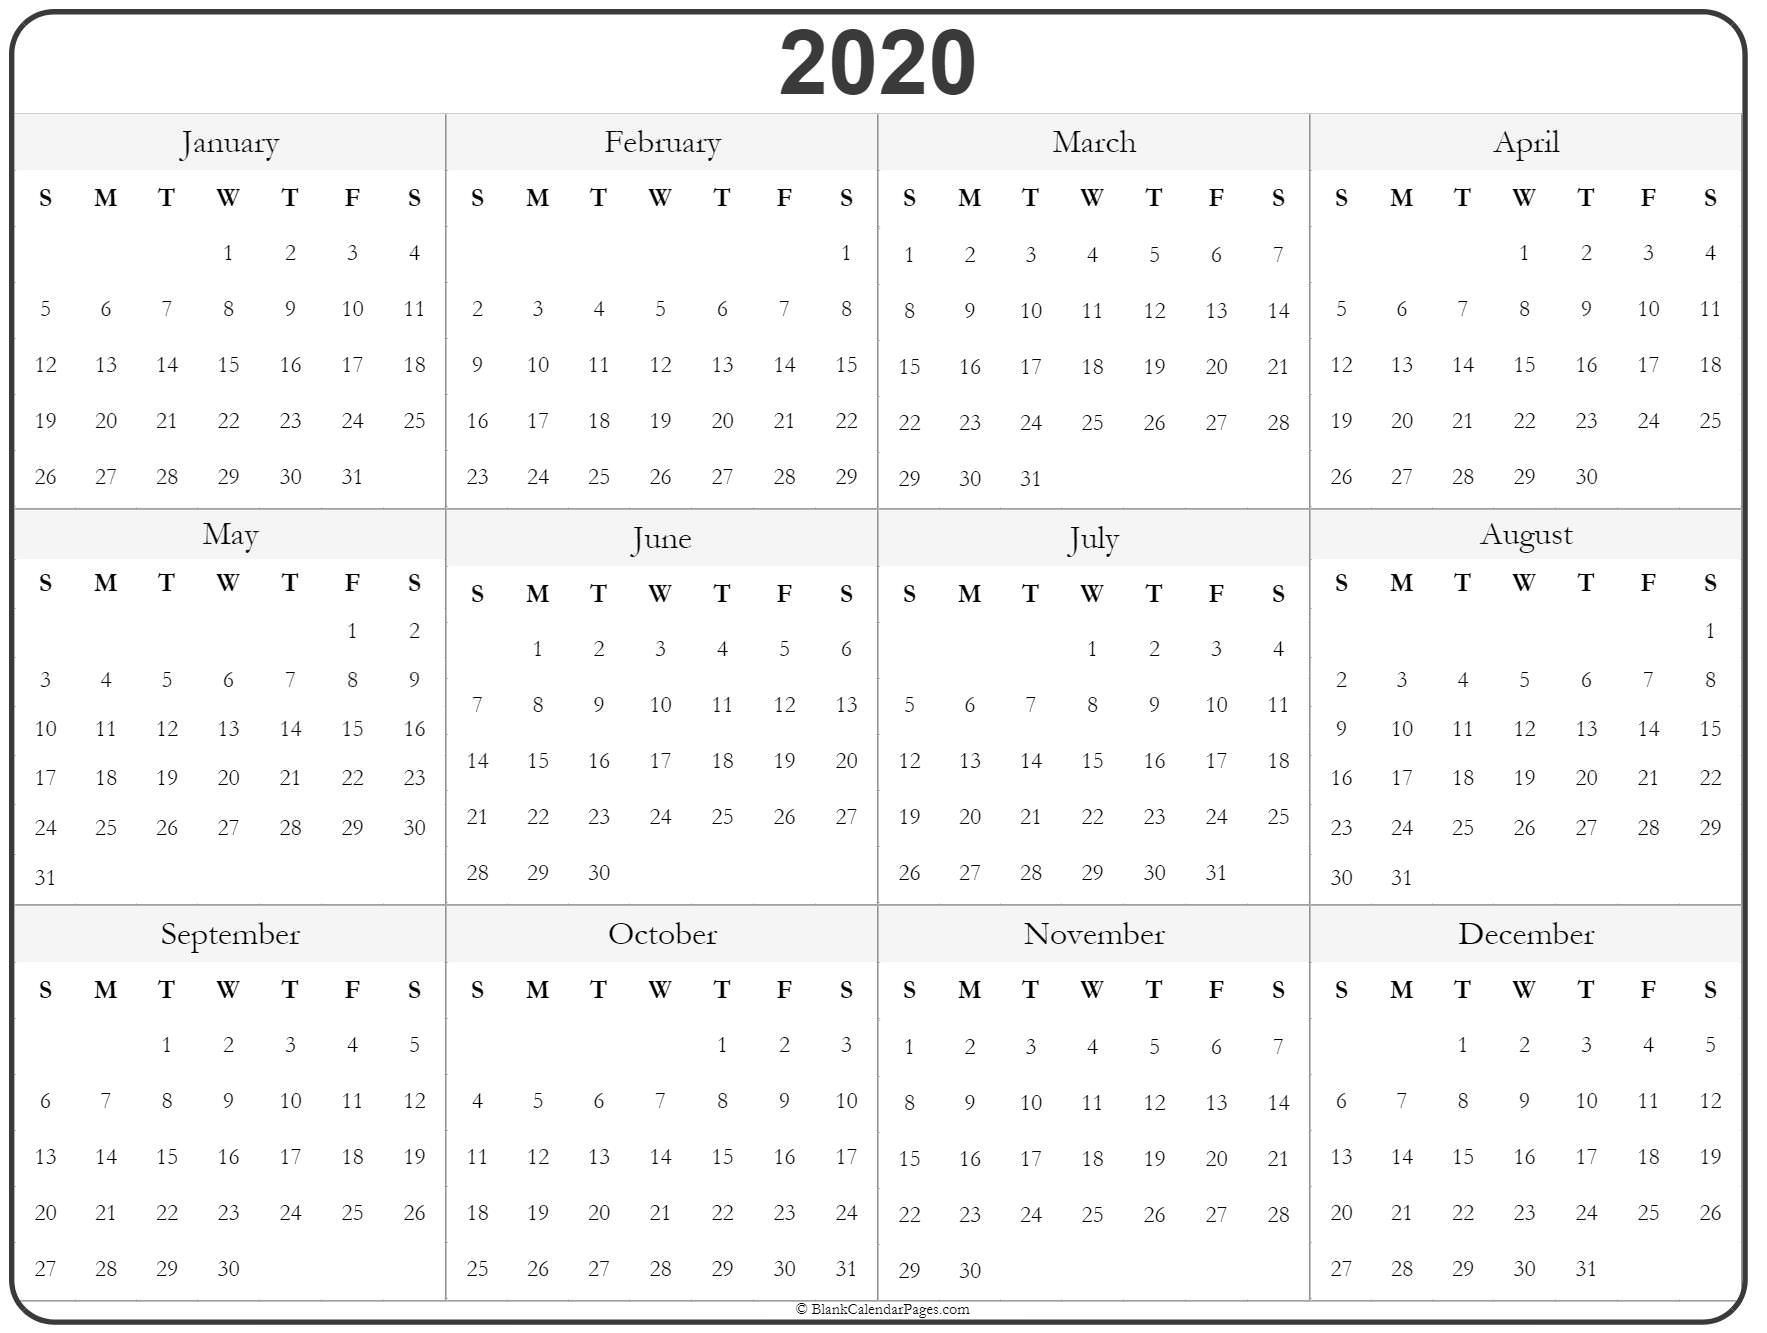 Exceptional Printable Calenders For The Whole Year 2020 In